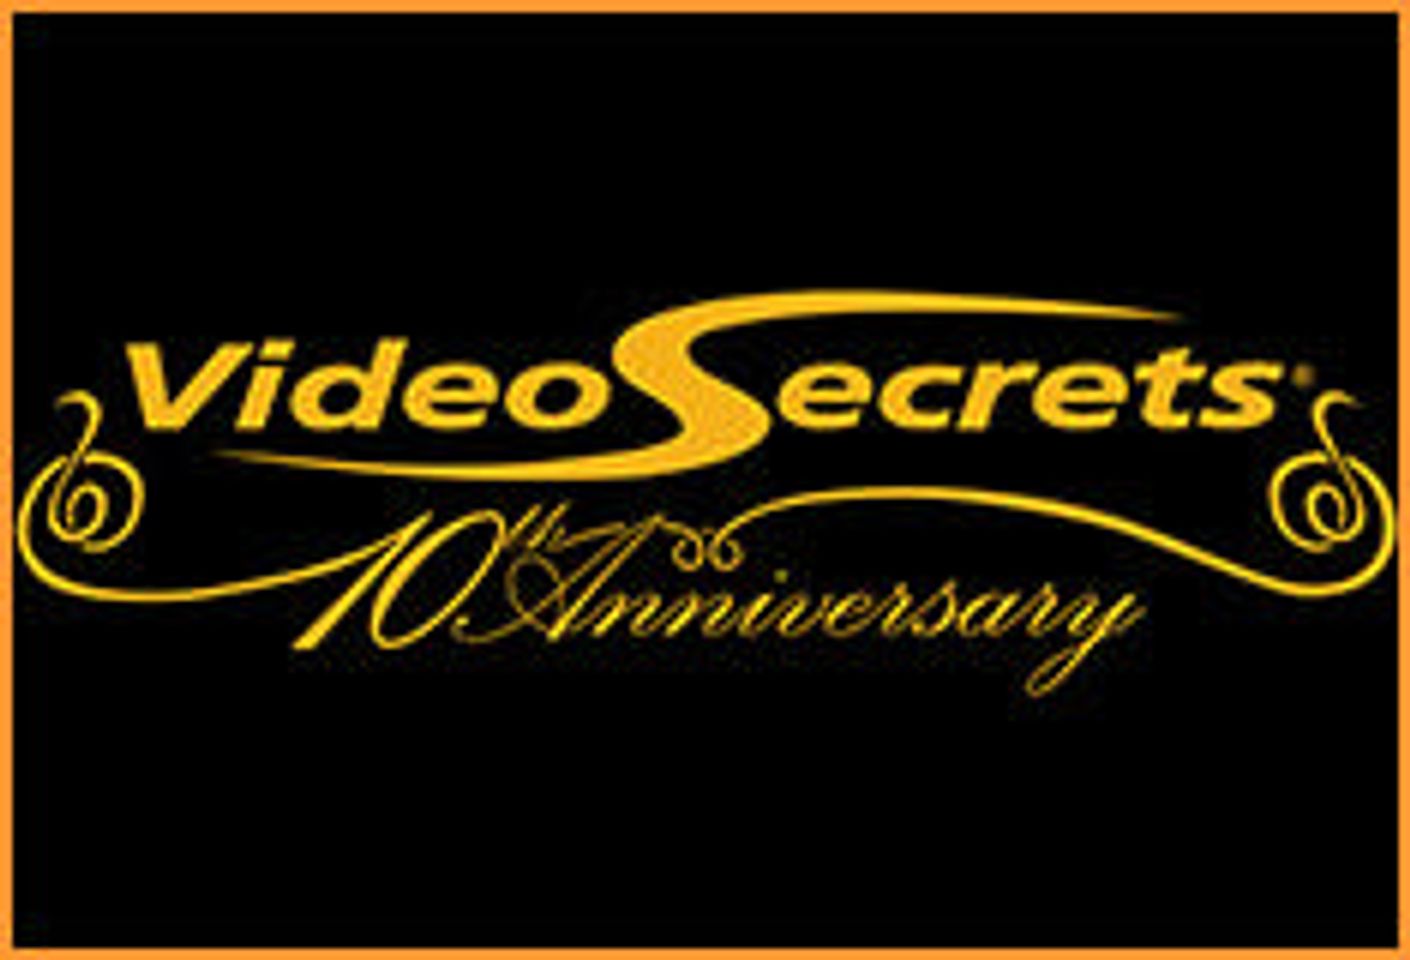 Video Secrets to Host 10th Anniversary Party